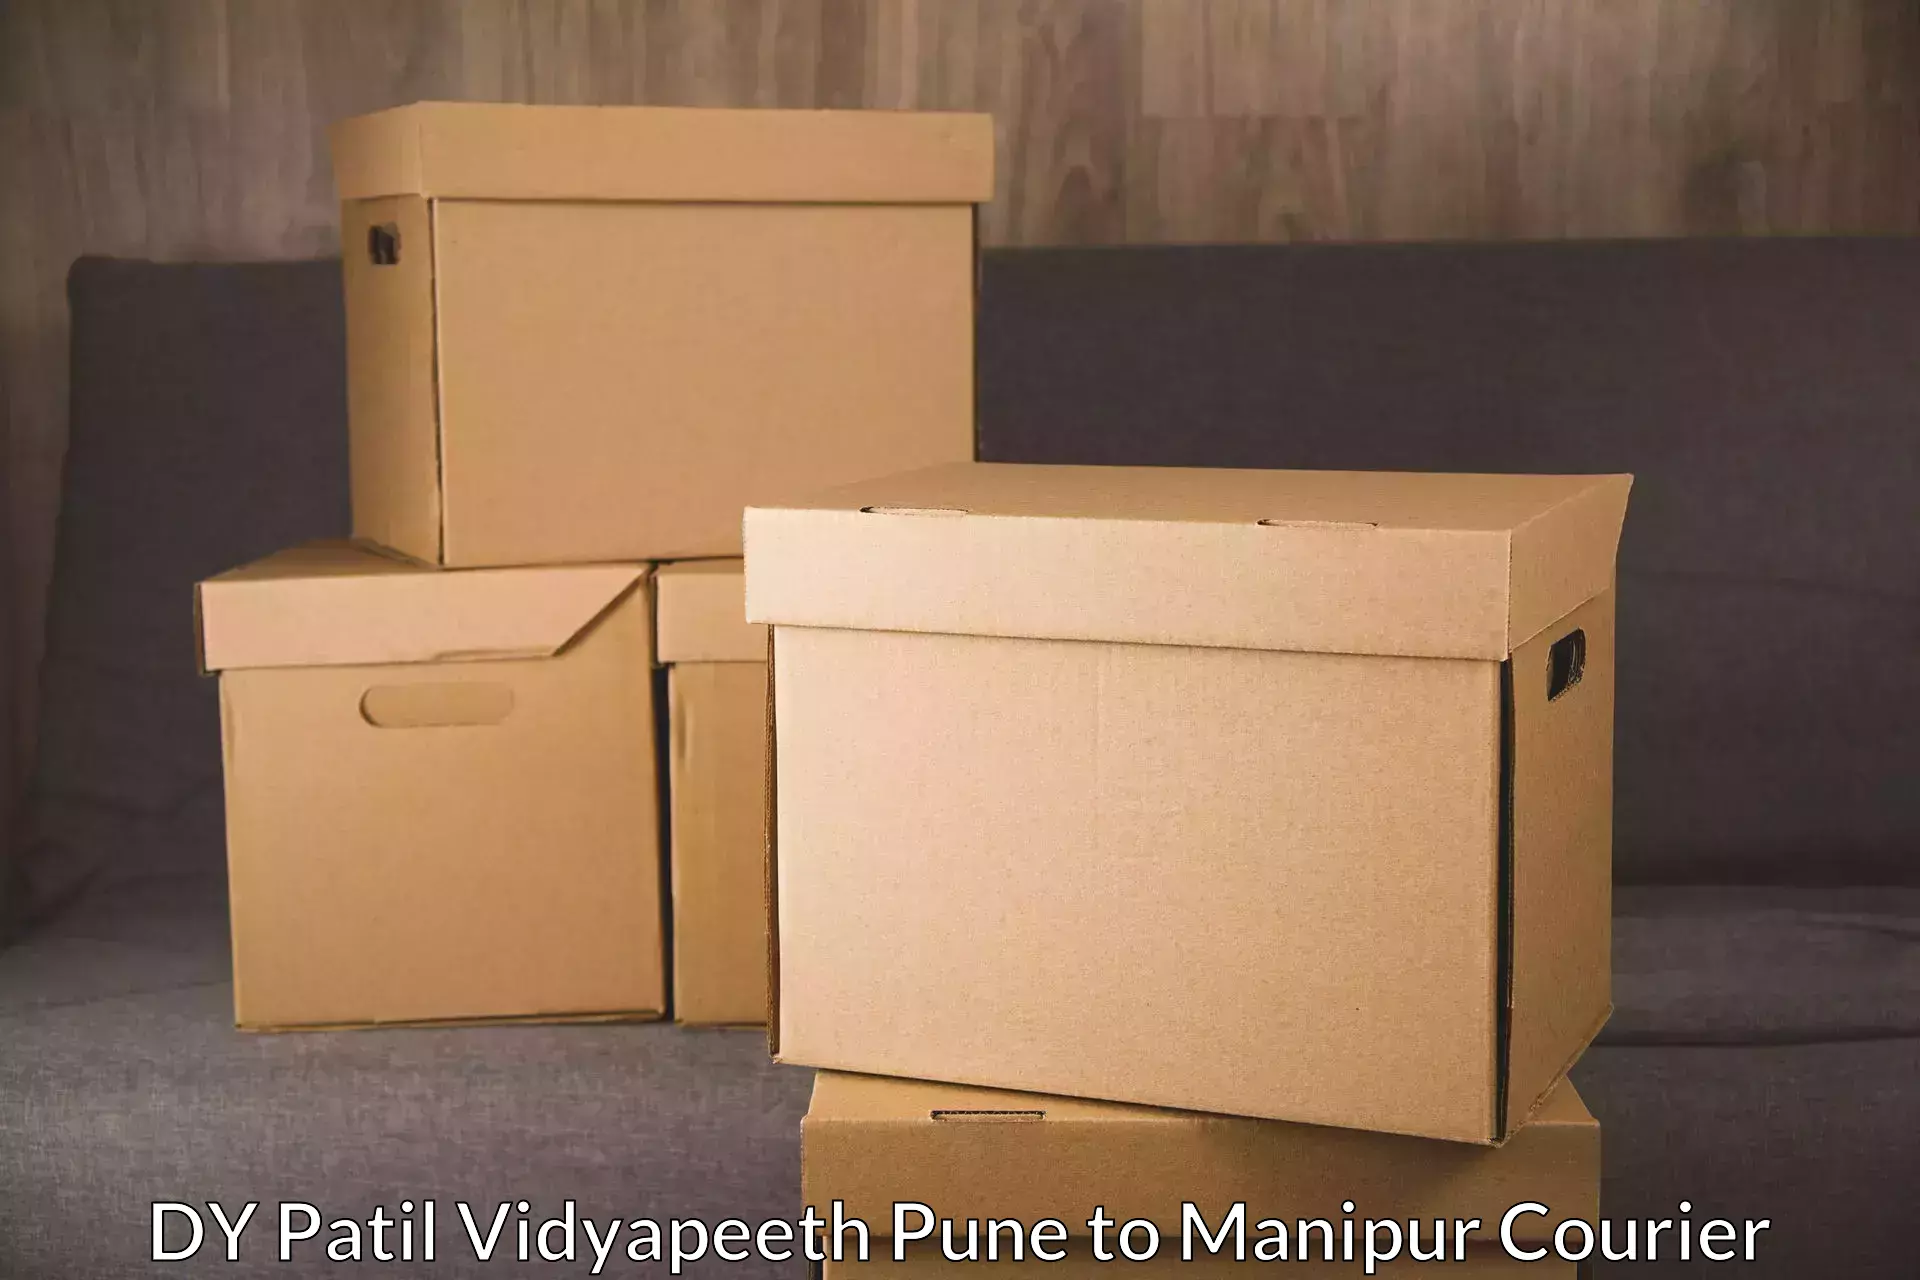 Premium delivery services DY Patil Vidyapeeth Pune to Moirang